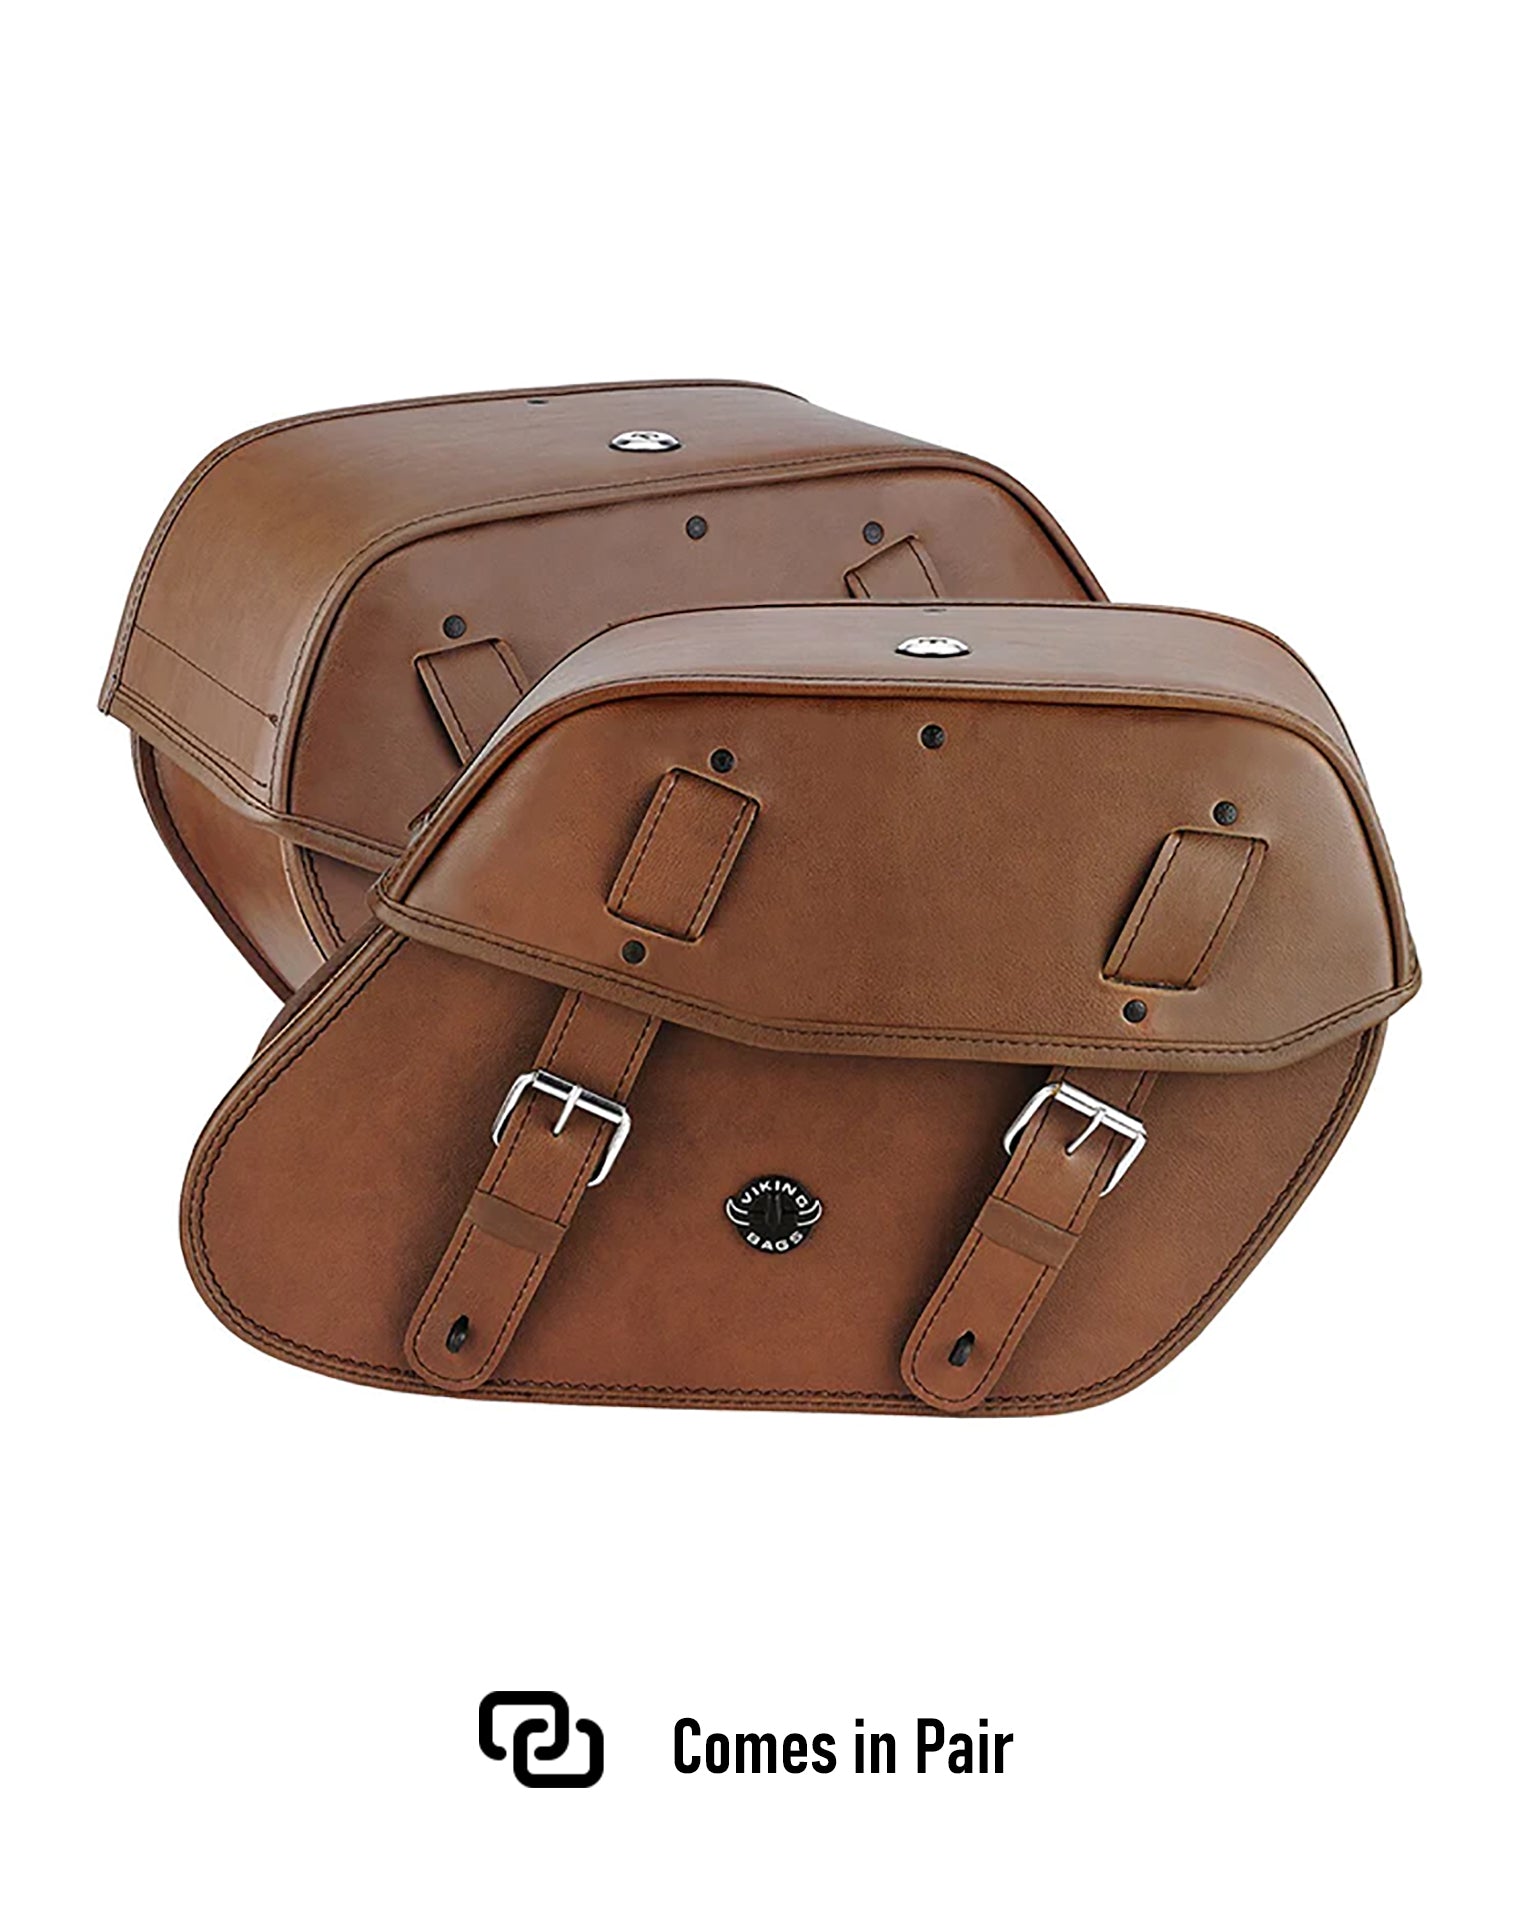 Viking Odin Brown Large Leather Motorcycle Saddlebags For Harley Softail Night Train Fxstb I Weather Resistant Bags Comes in Pair